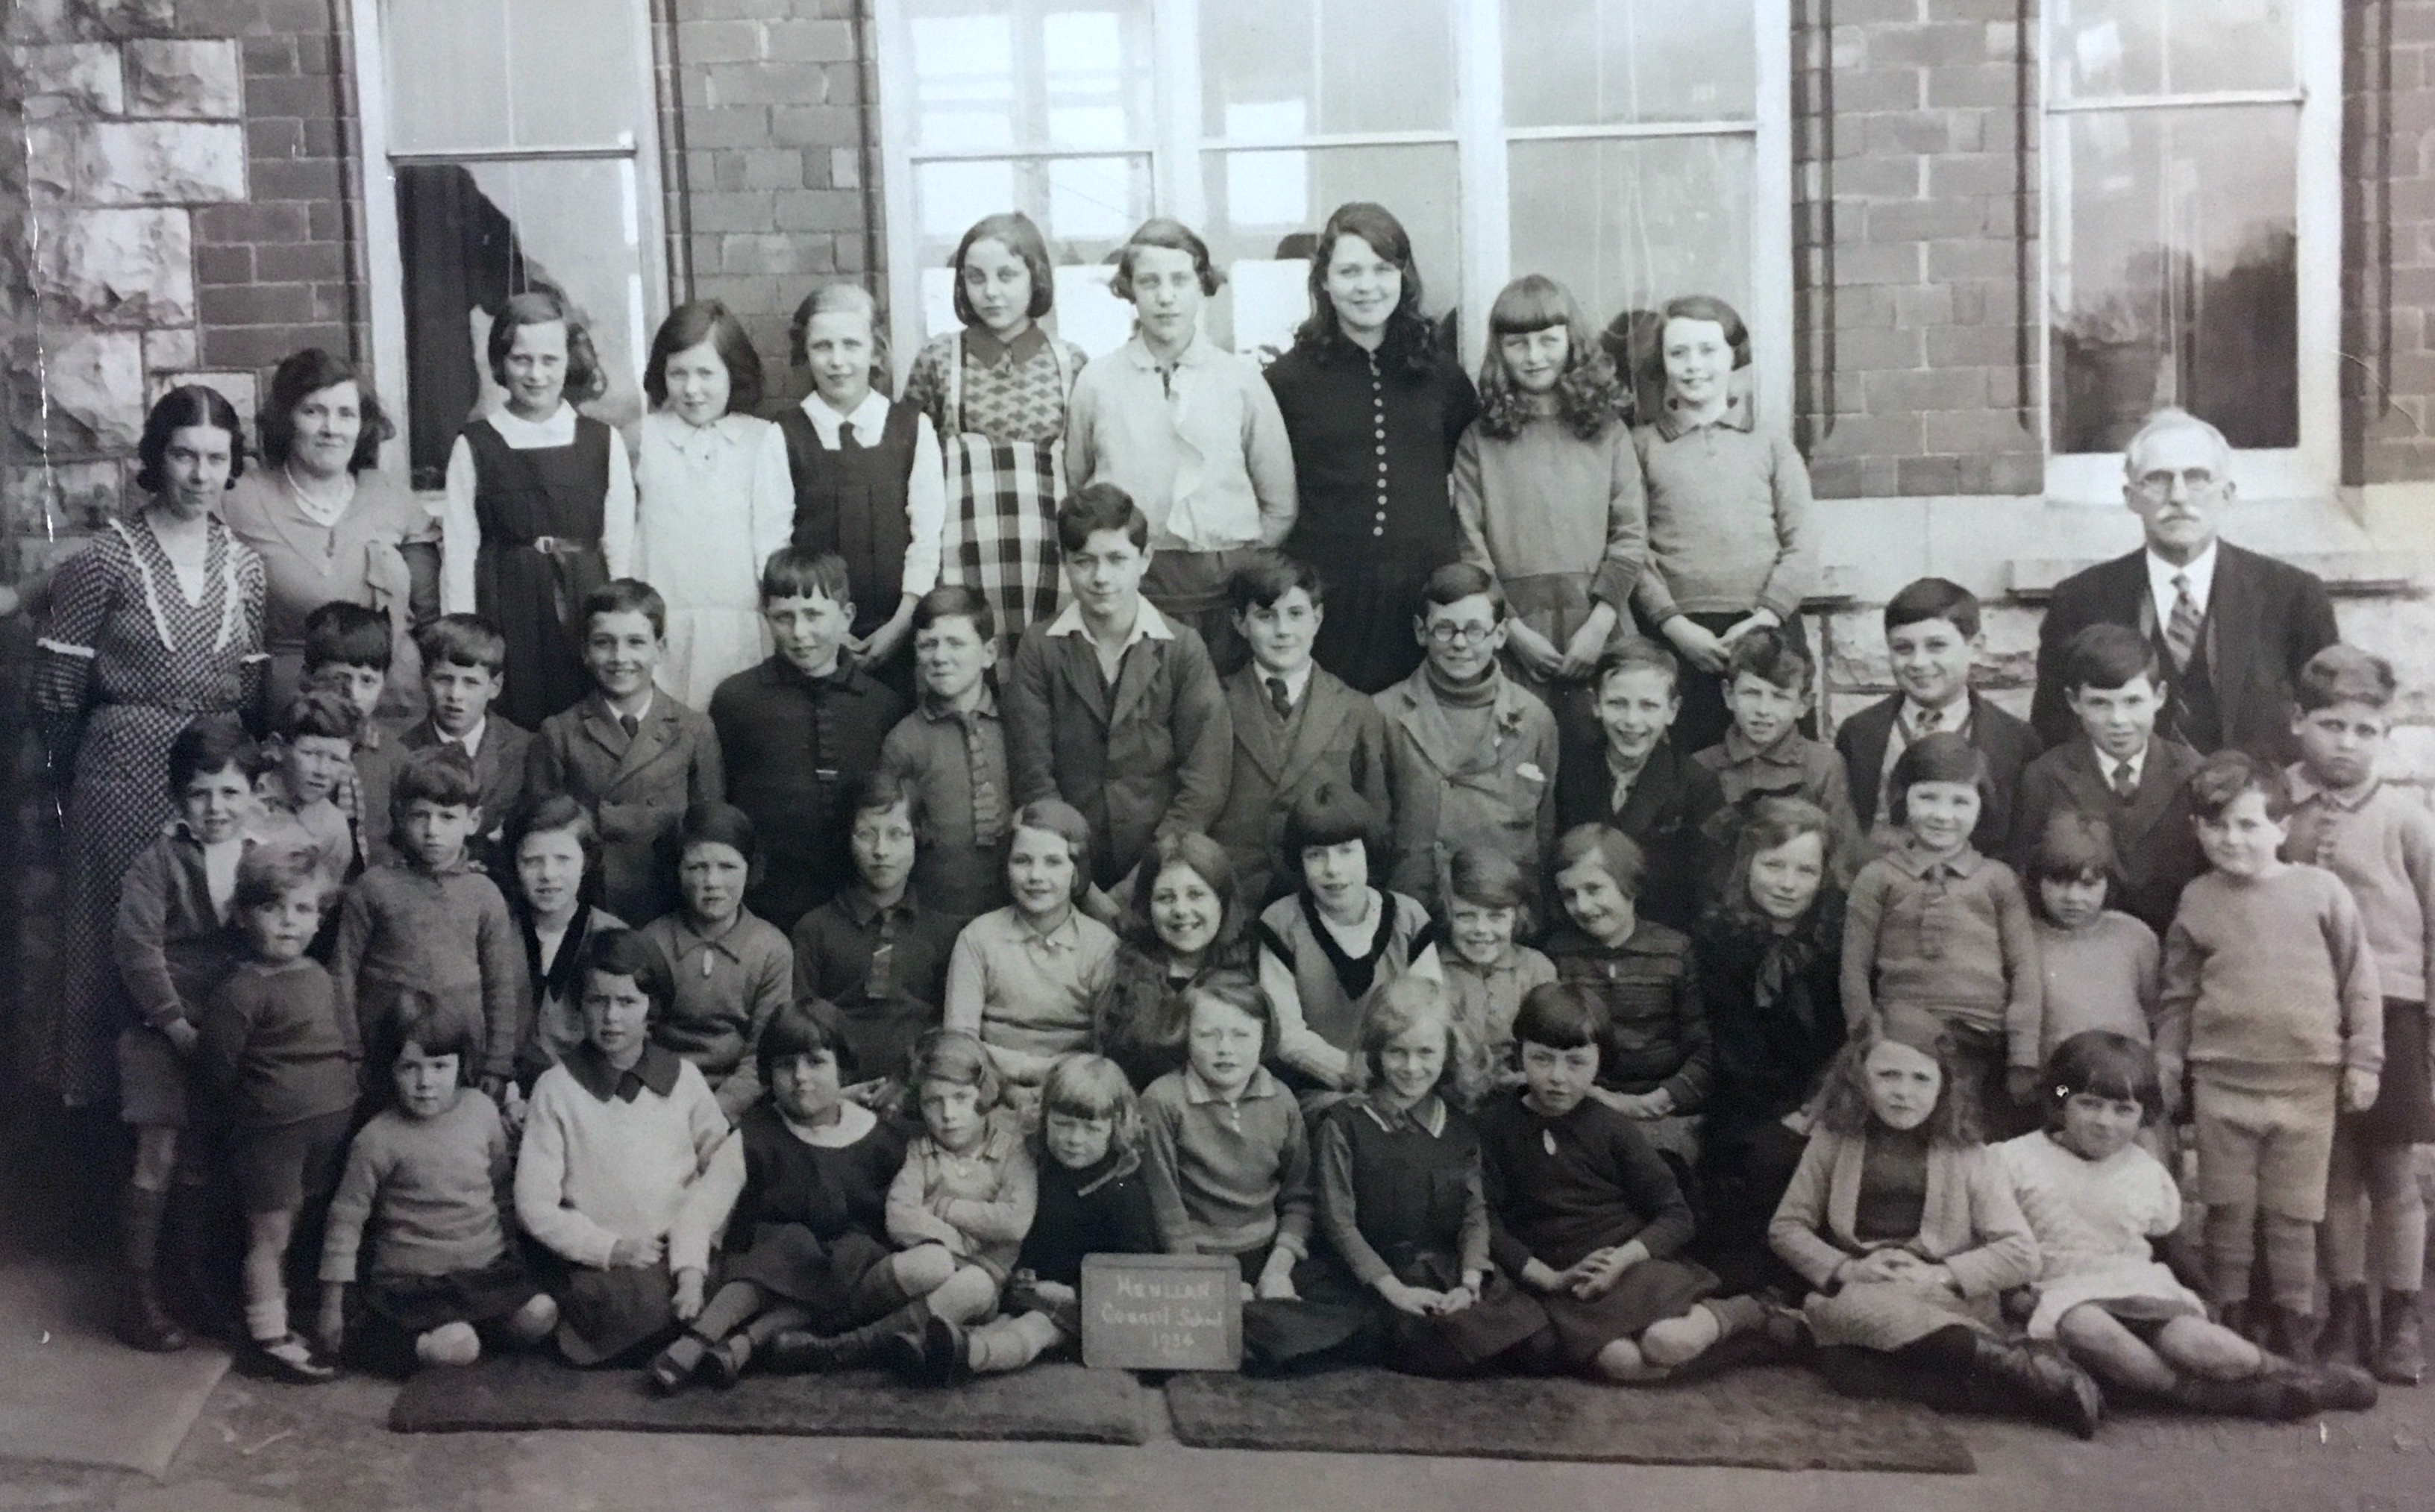 Henllan school 1934 If anyone’s Grandparents went to Henllan School maybe they can name someone